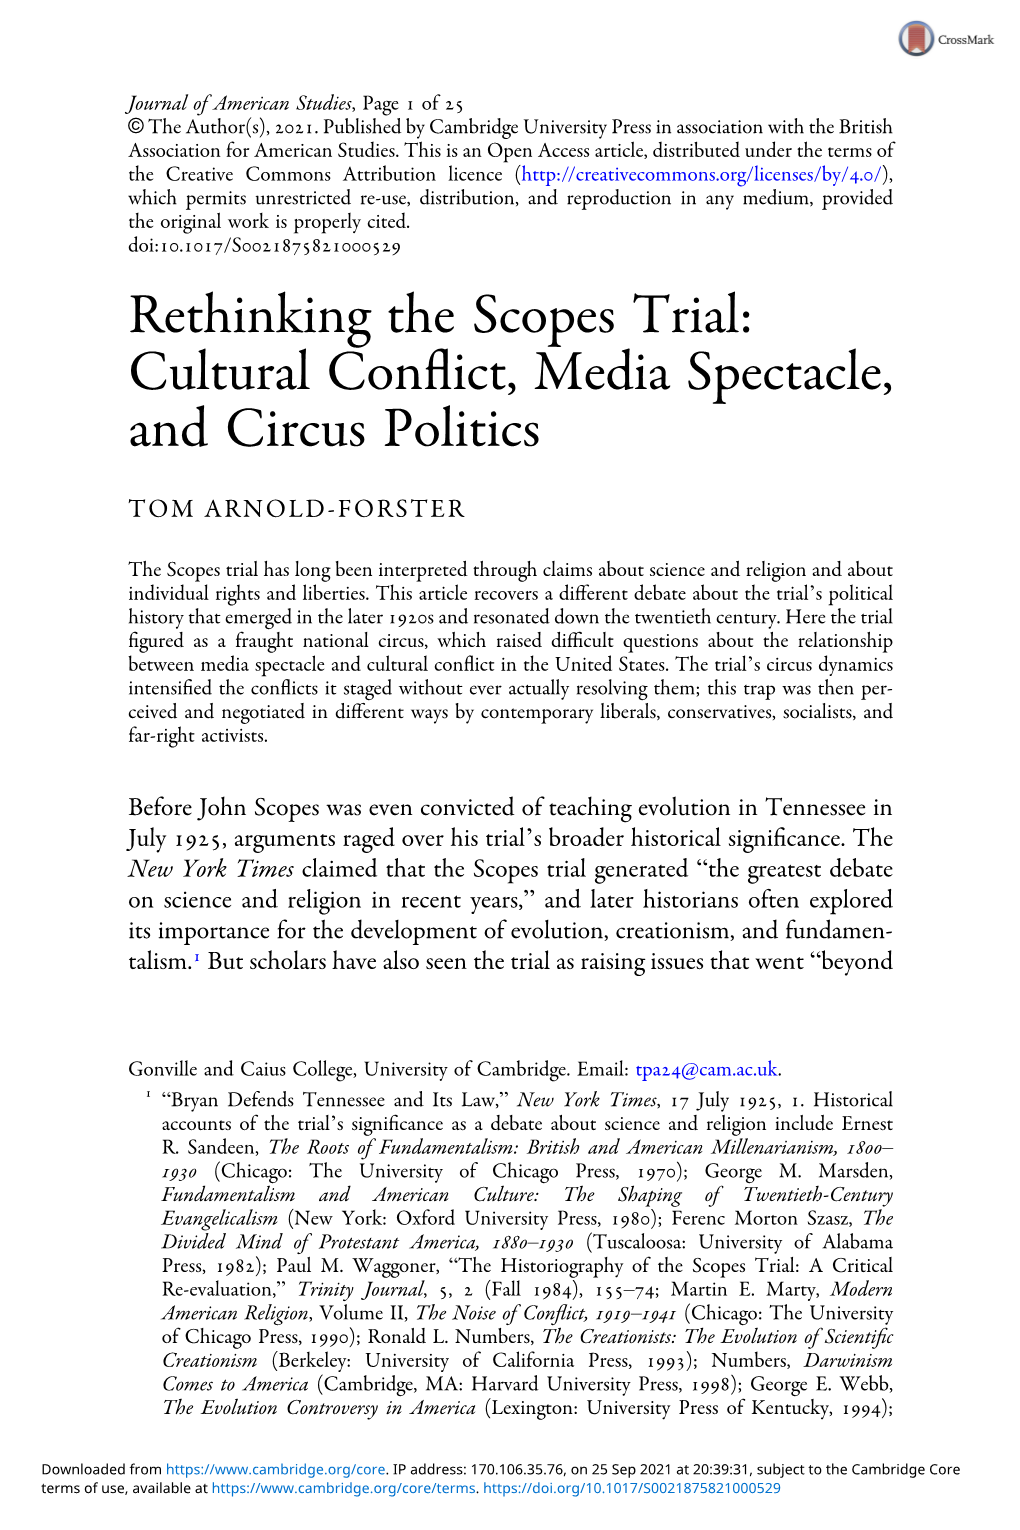 Rethinking the Scopes Trial: Cultural Conﬂict, Media Spectacle, and Circus Politics